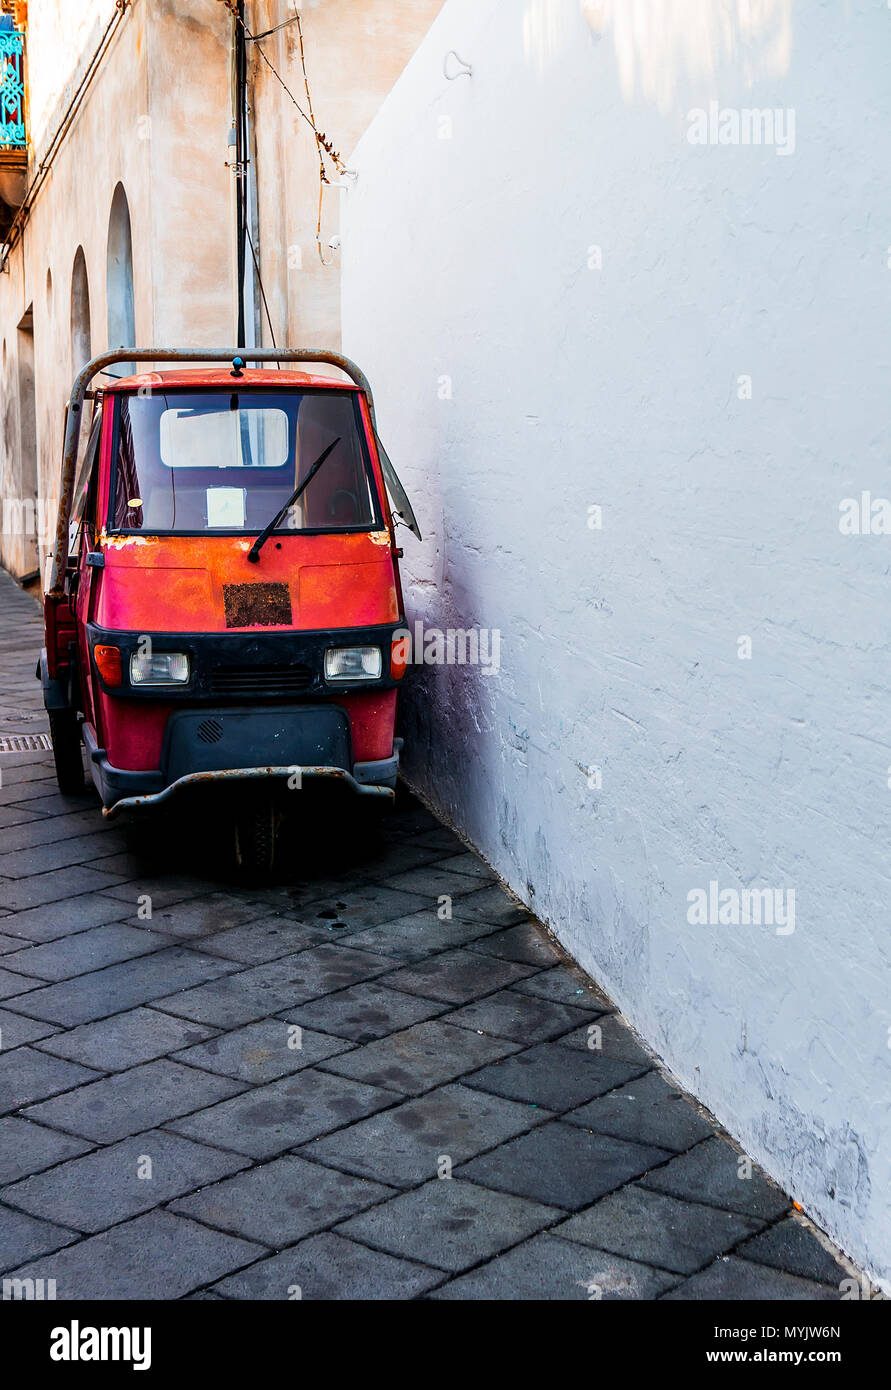 Tiny truck / car in Italy parked on the side of a road. Frontal view Stock Photo